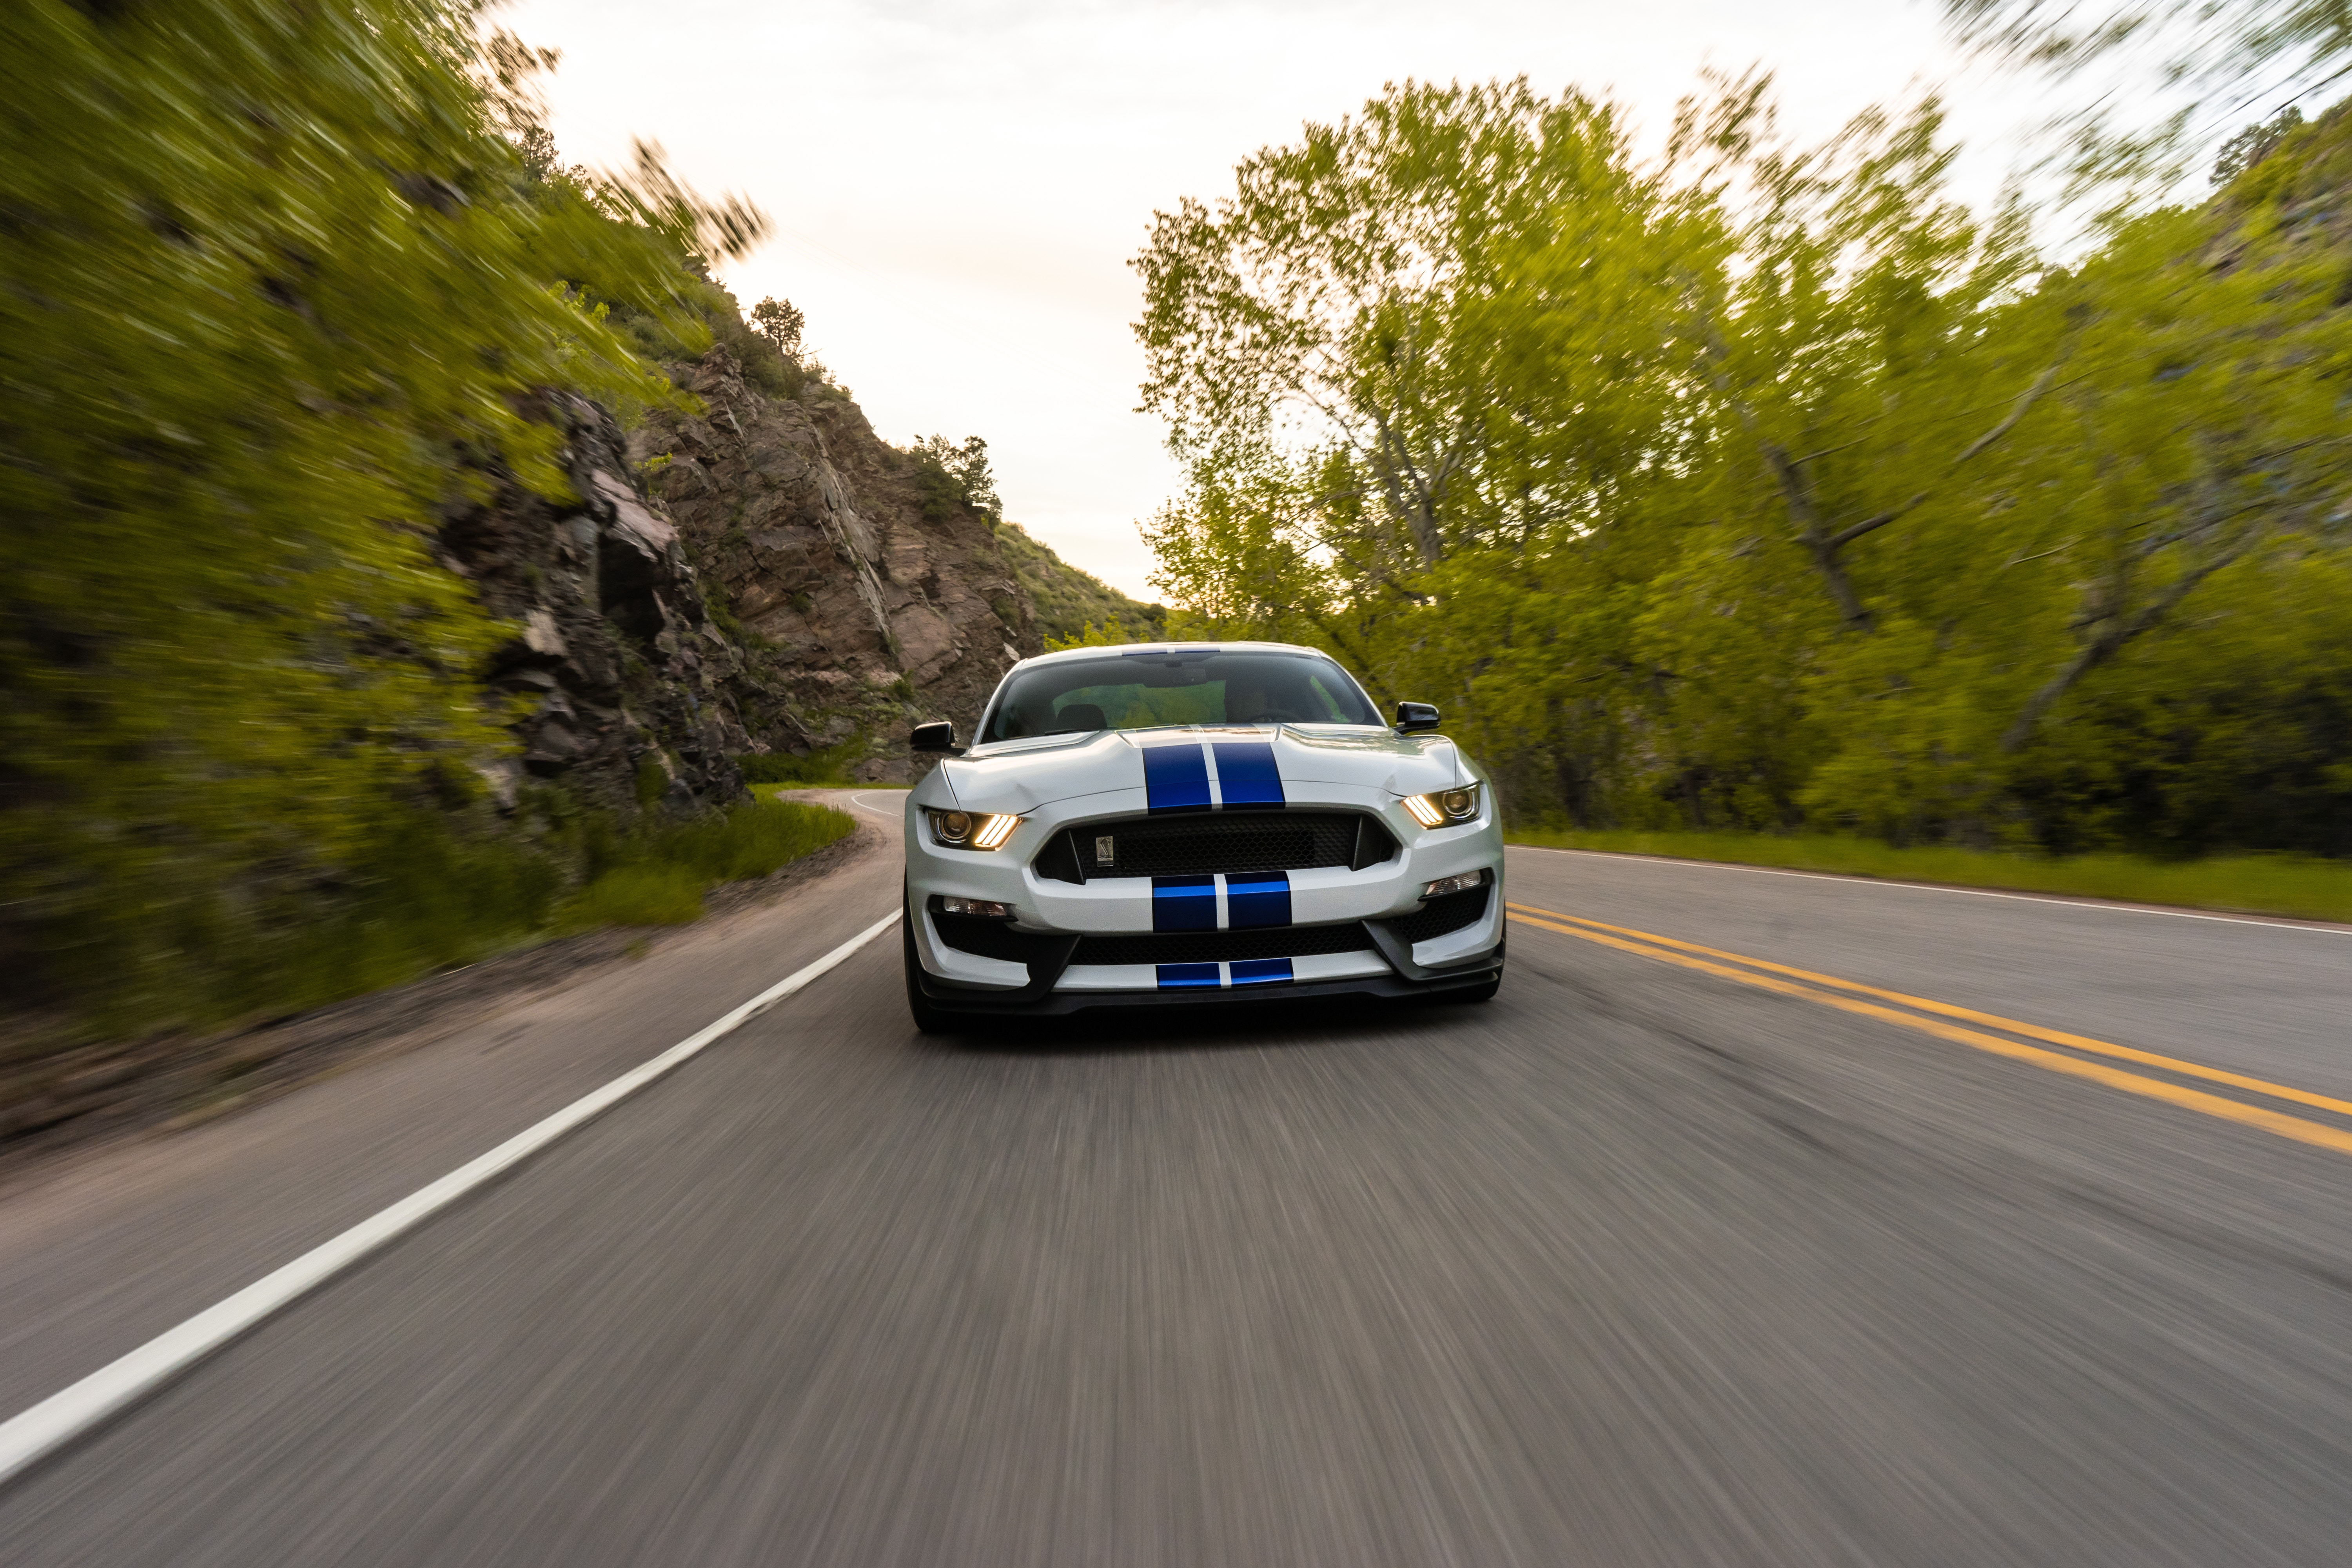 cars, sports car, ford mustang gt350, car, sports, ford, road, machine, speed Aesthetic wallpaper